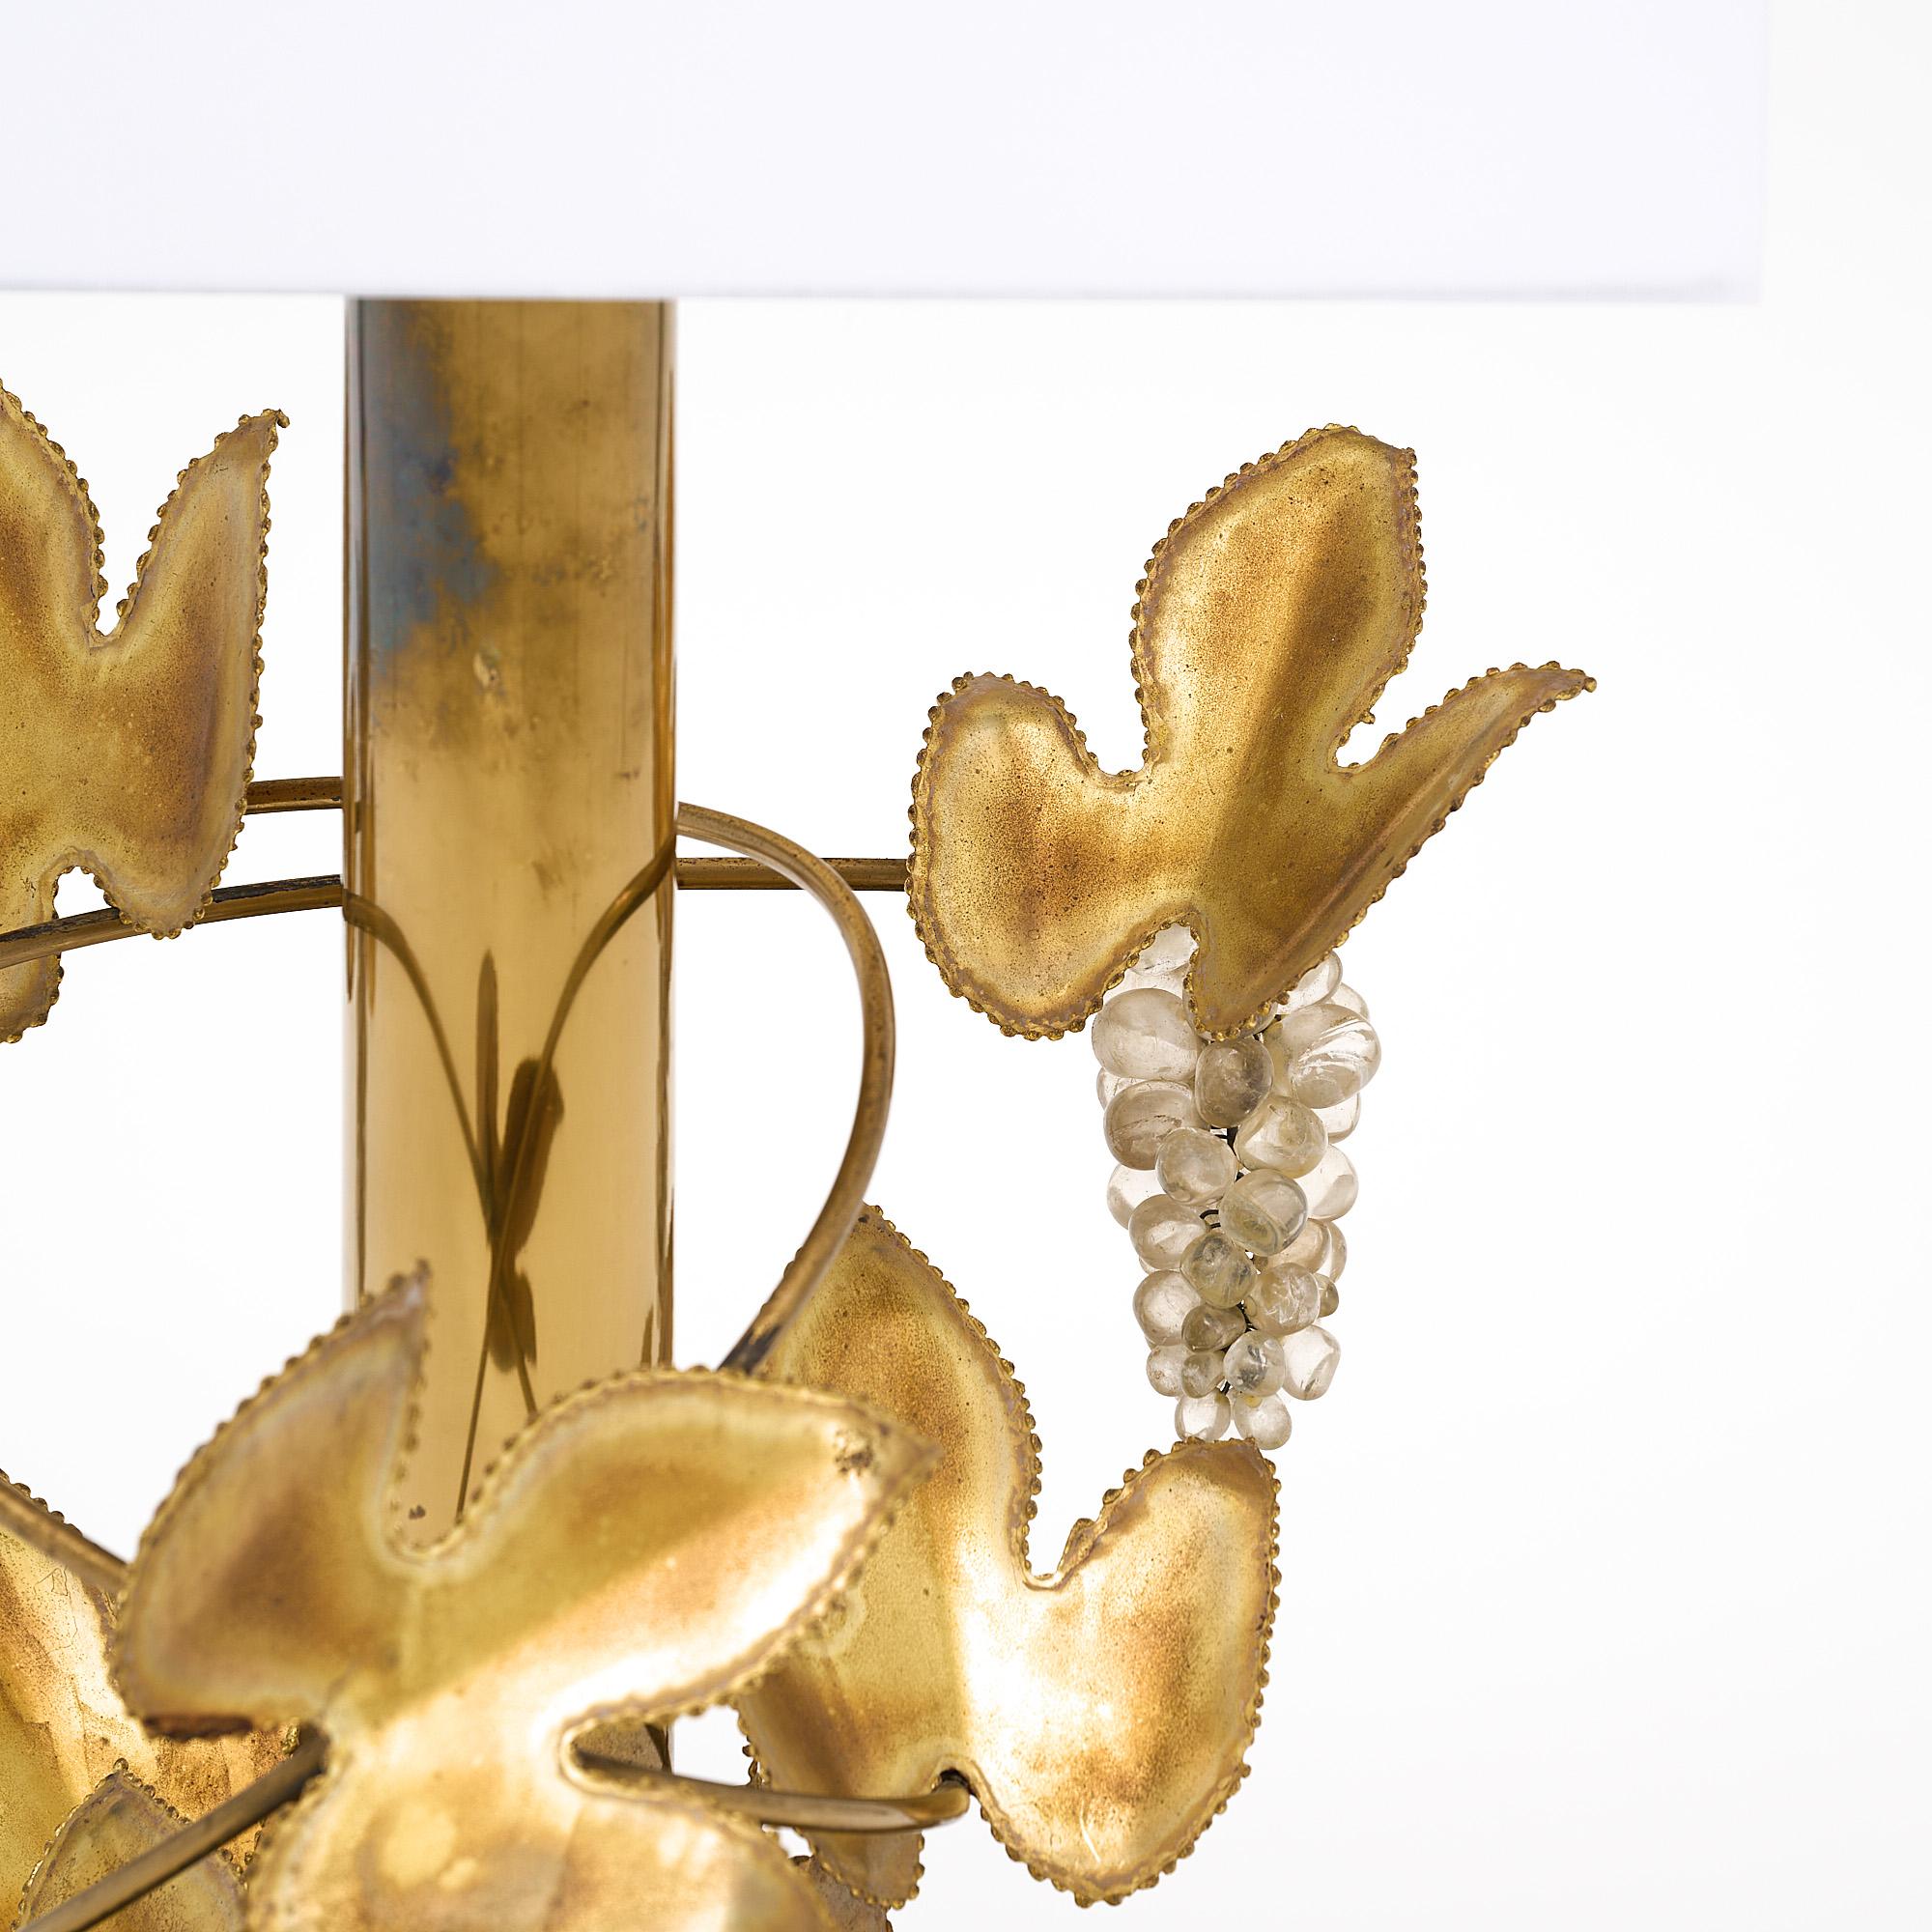 Table lamp, French, by Christian Techoueyres for Maison Jansen. The fixture features vine of embossed brass and glass grapes. It has been newly wired to fit US standards.